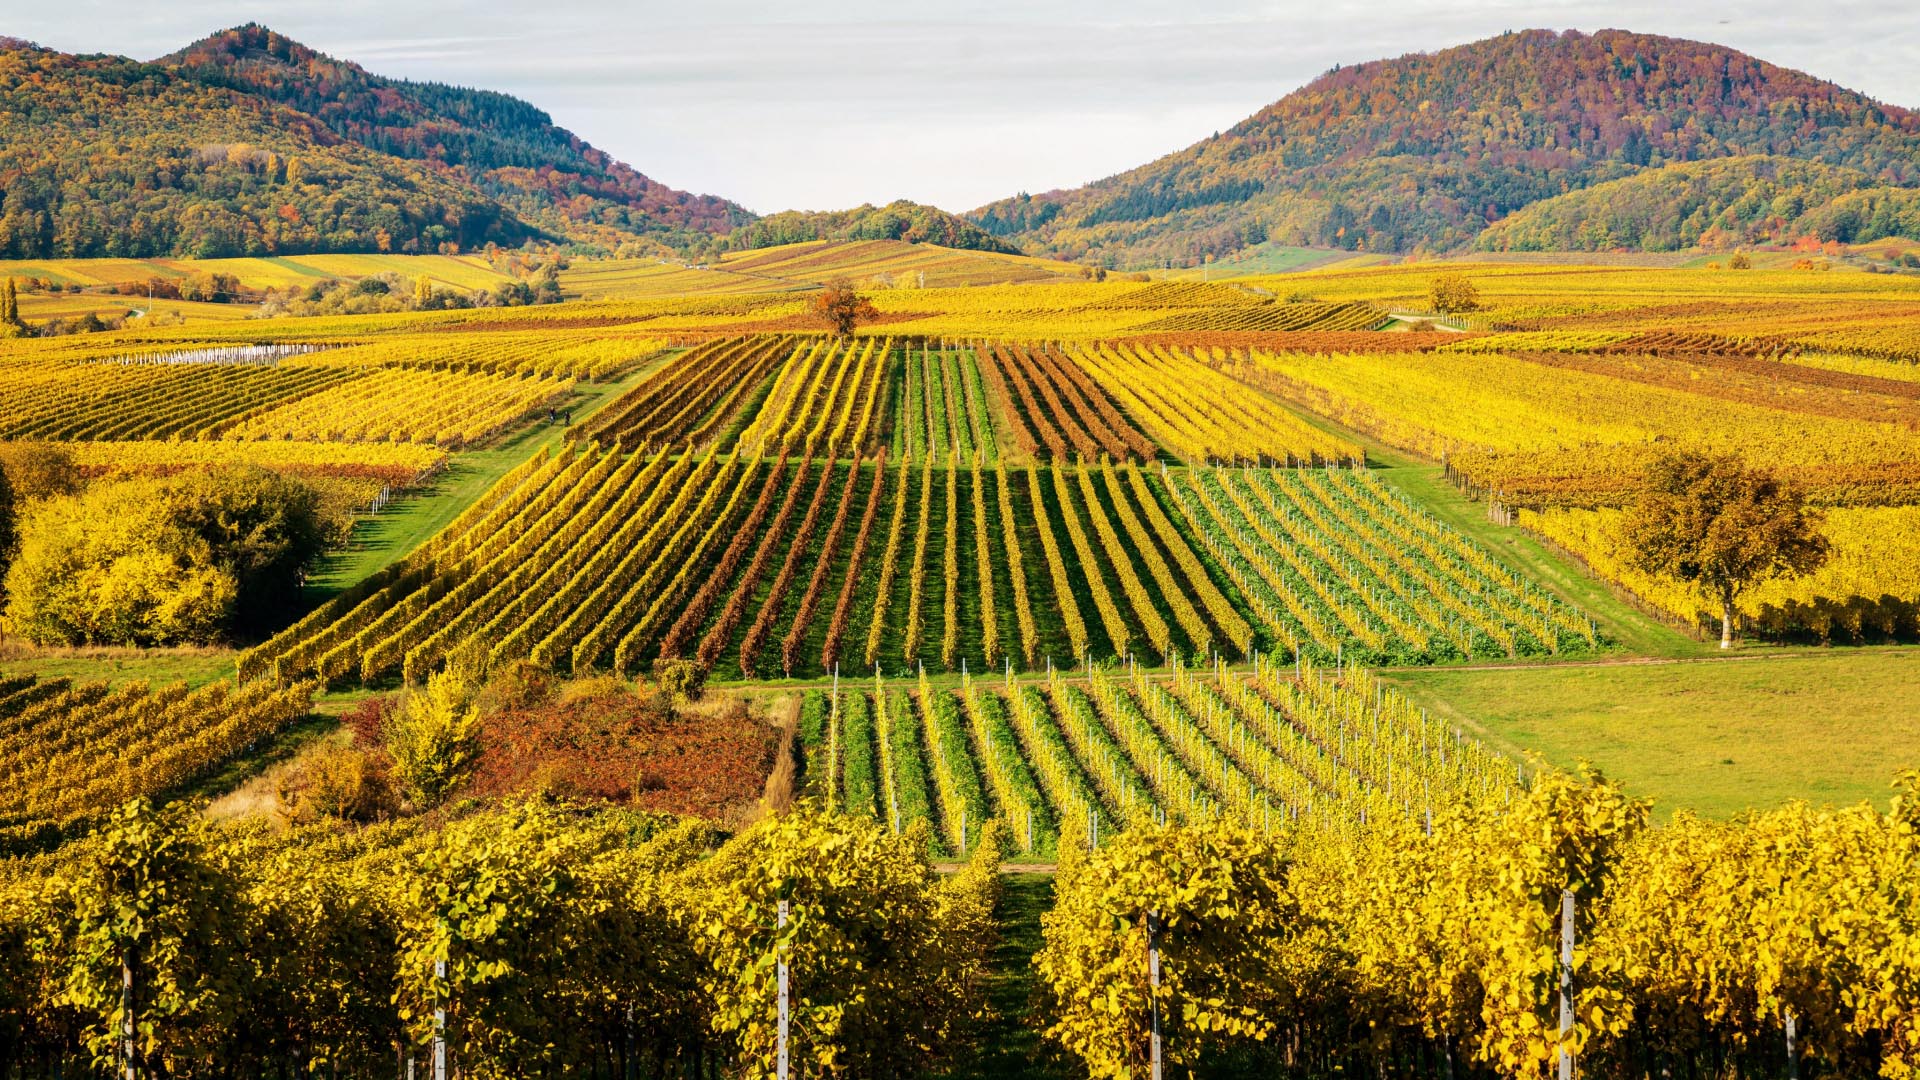 Stage, wide view over the Pfalzer vines